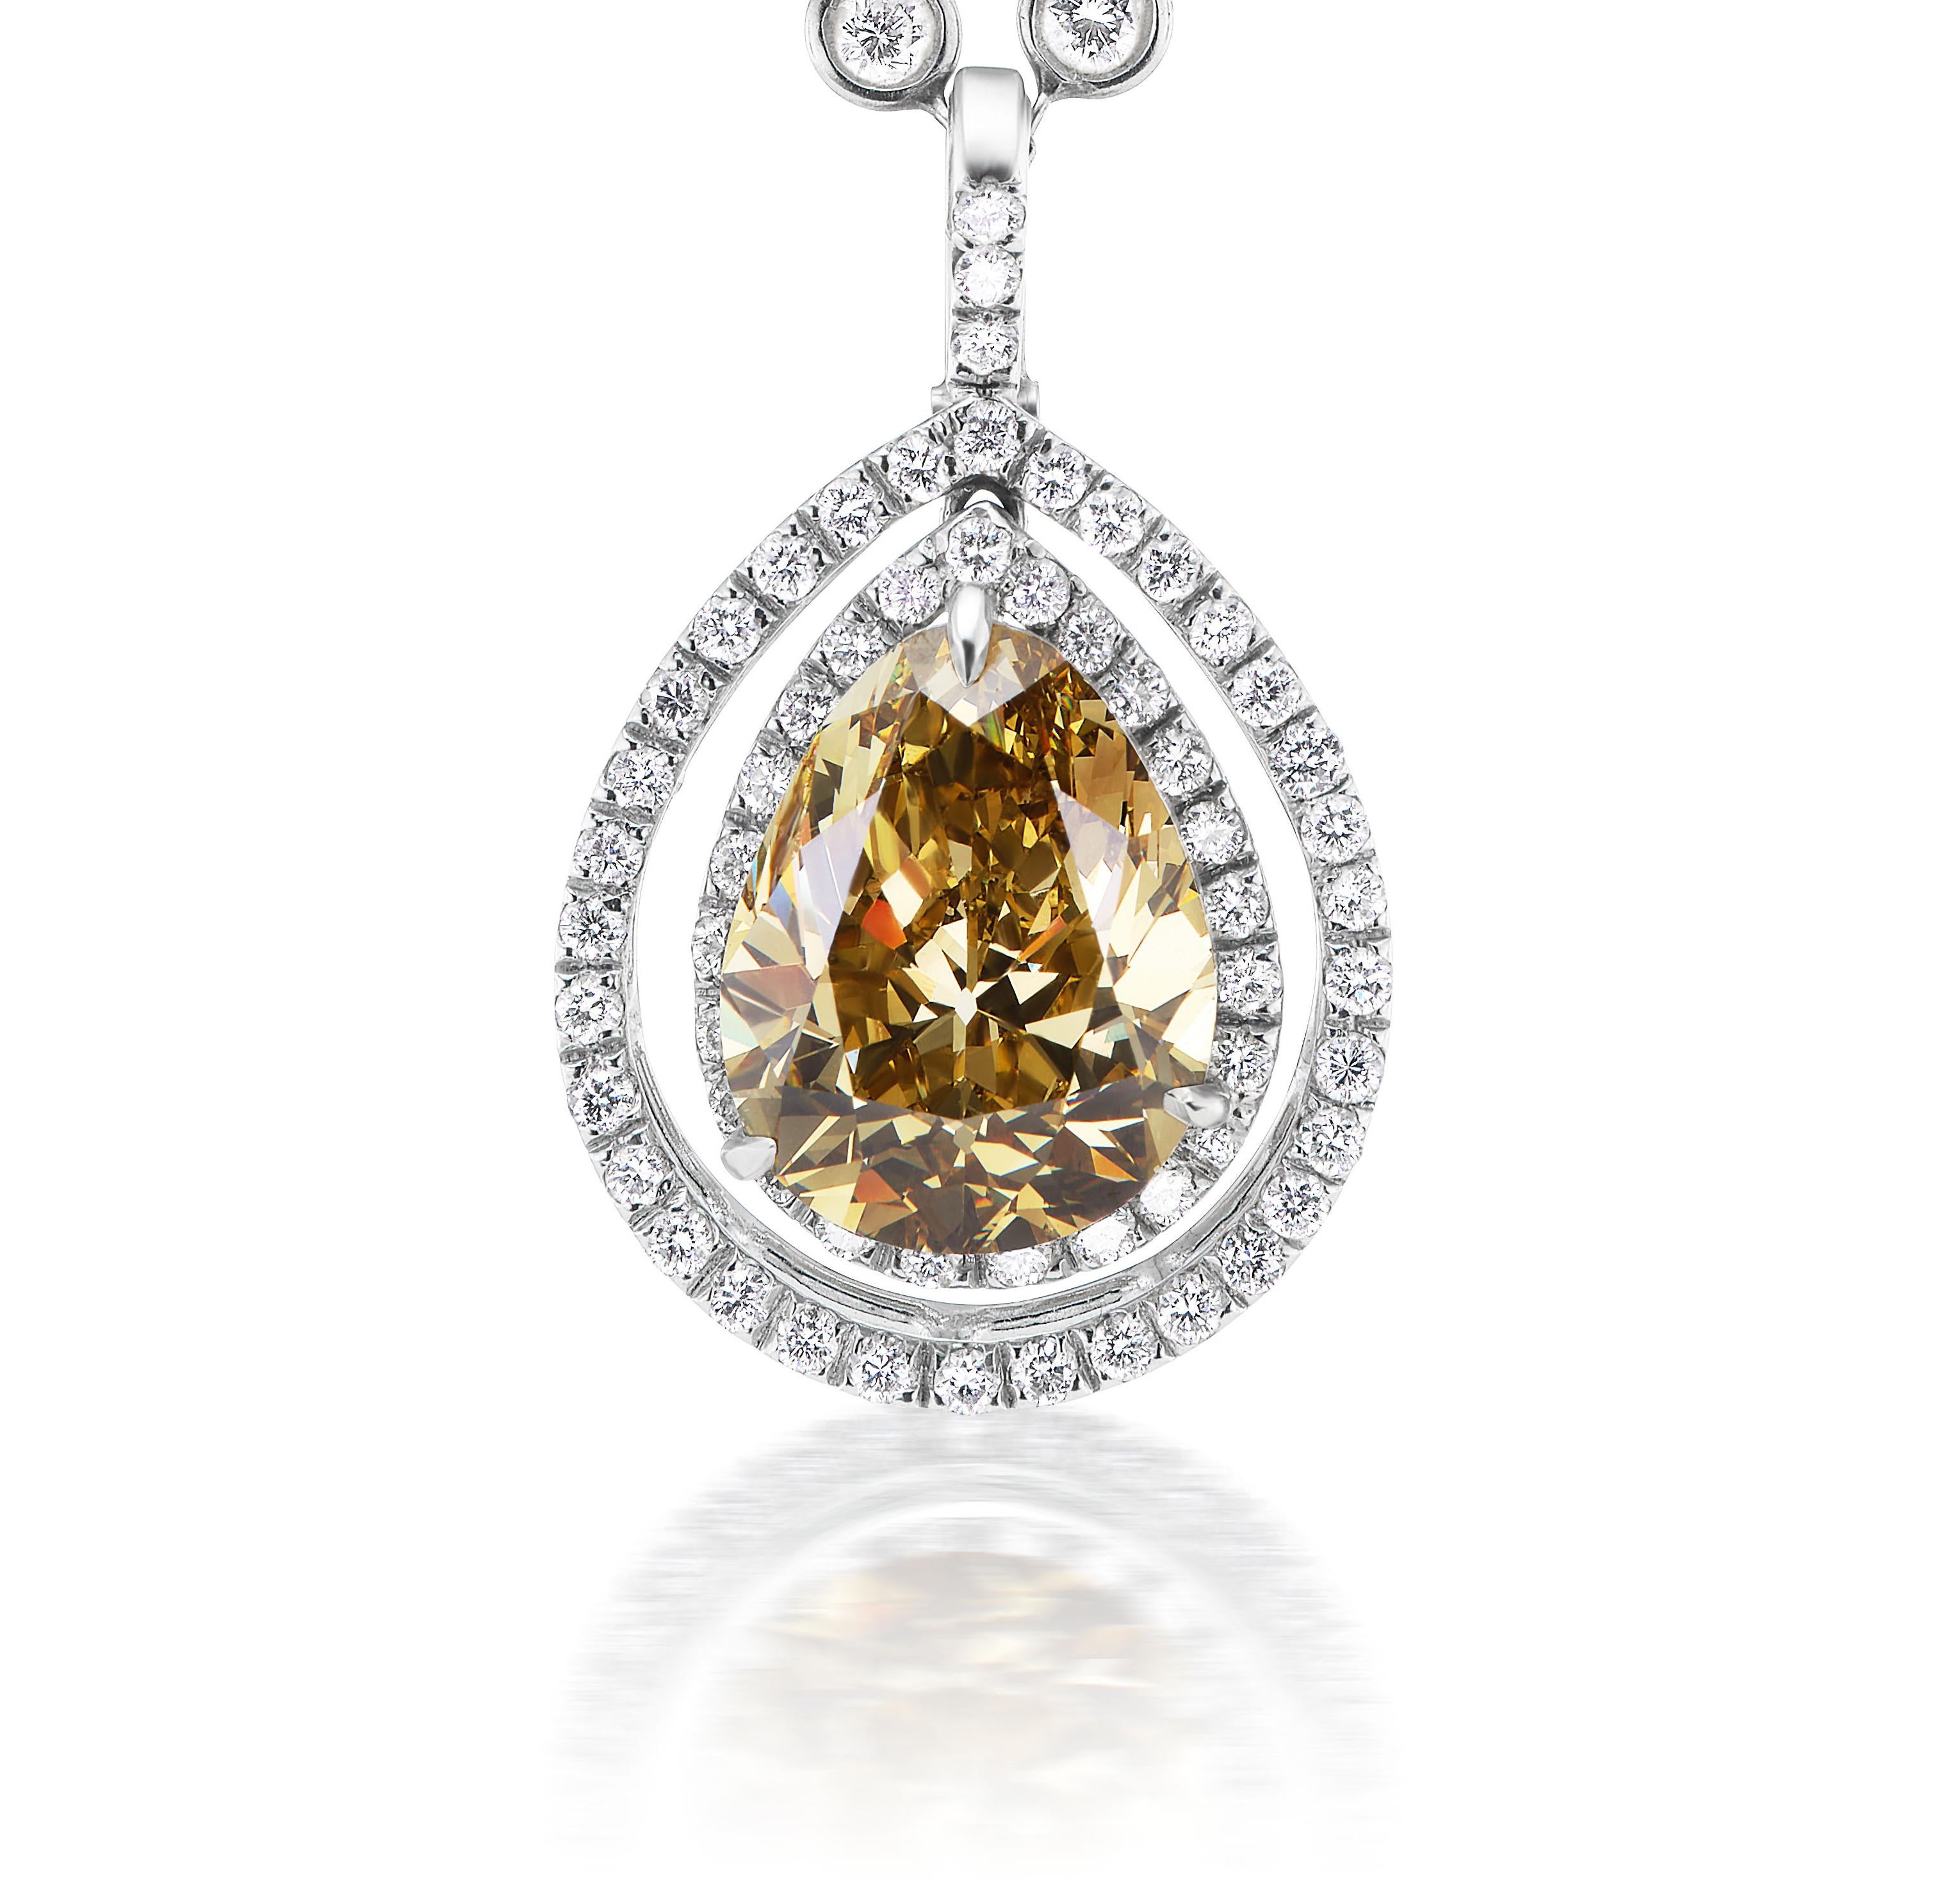 Rare and unique fancy deep brownish greenish yellow pear-shape diamond weighing 8.30 carats and VS1 clarity.

Set in double halo pendant hanging from 16 inch diamonds by the inch chain.

Comes with GIA certificate